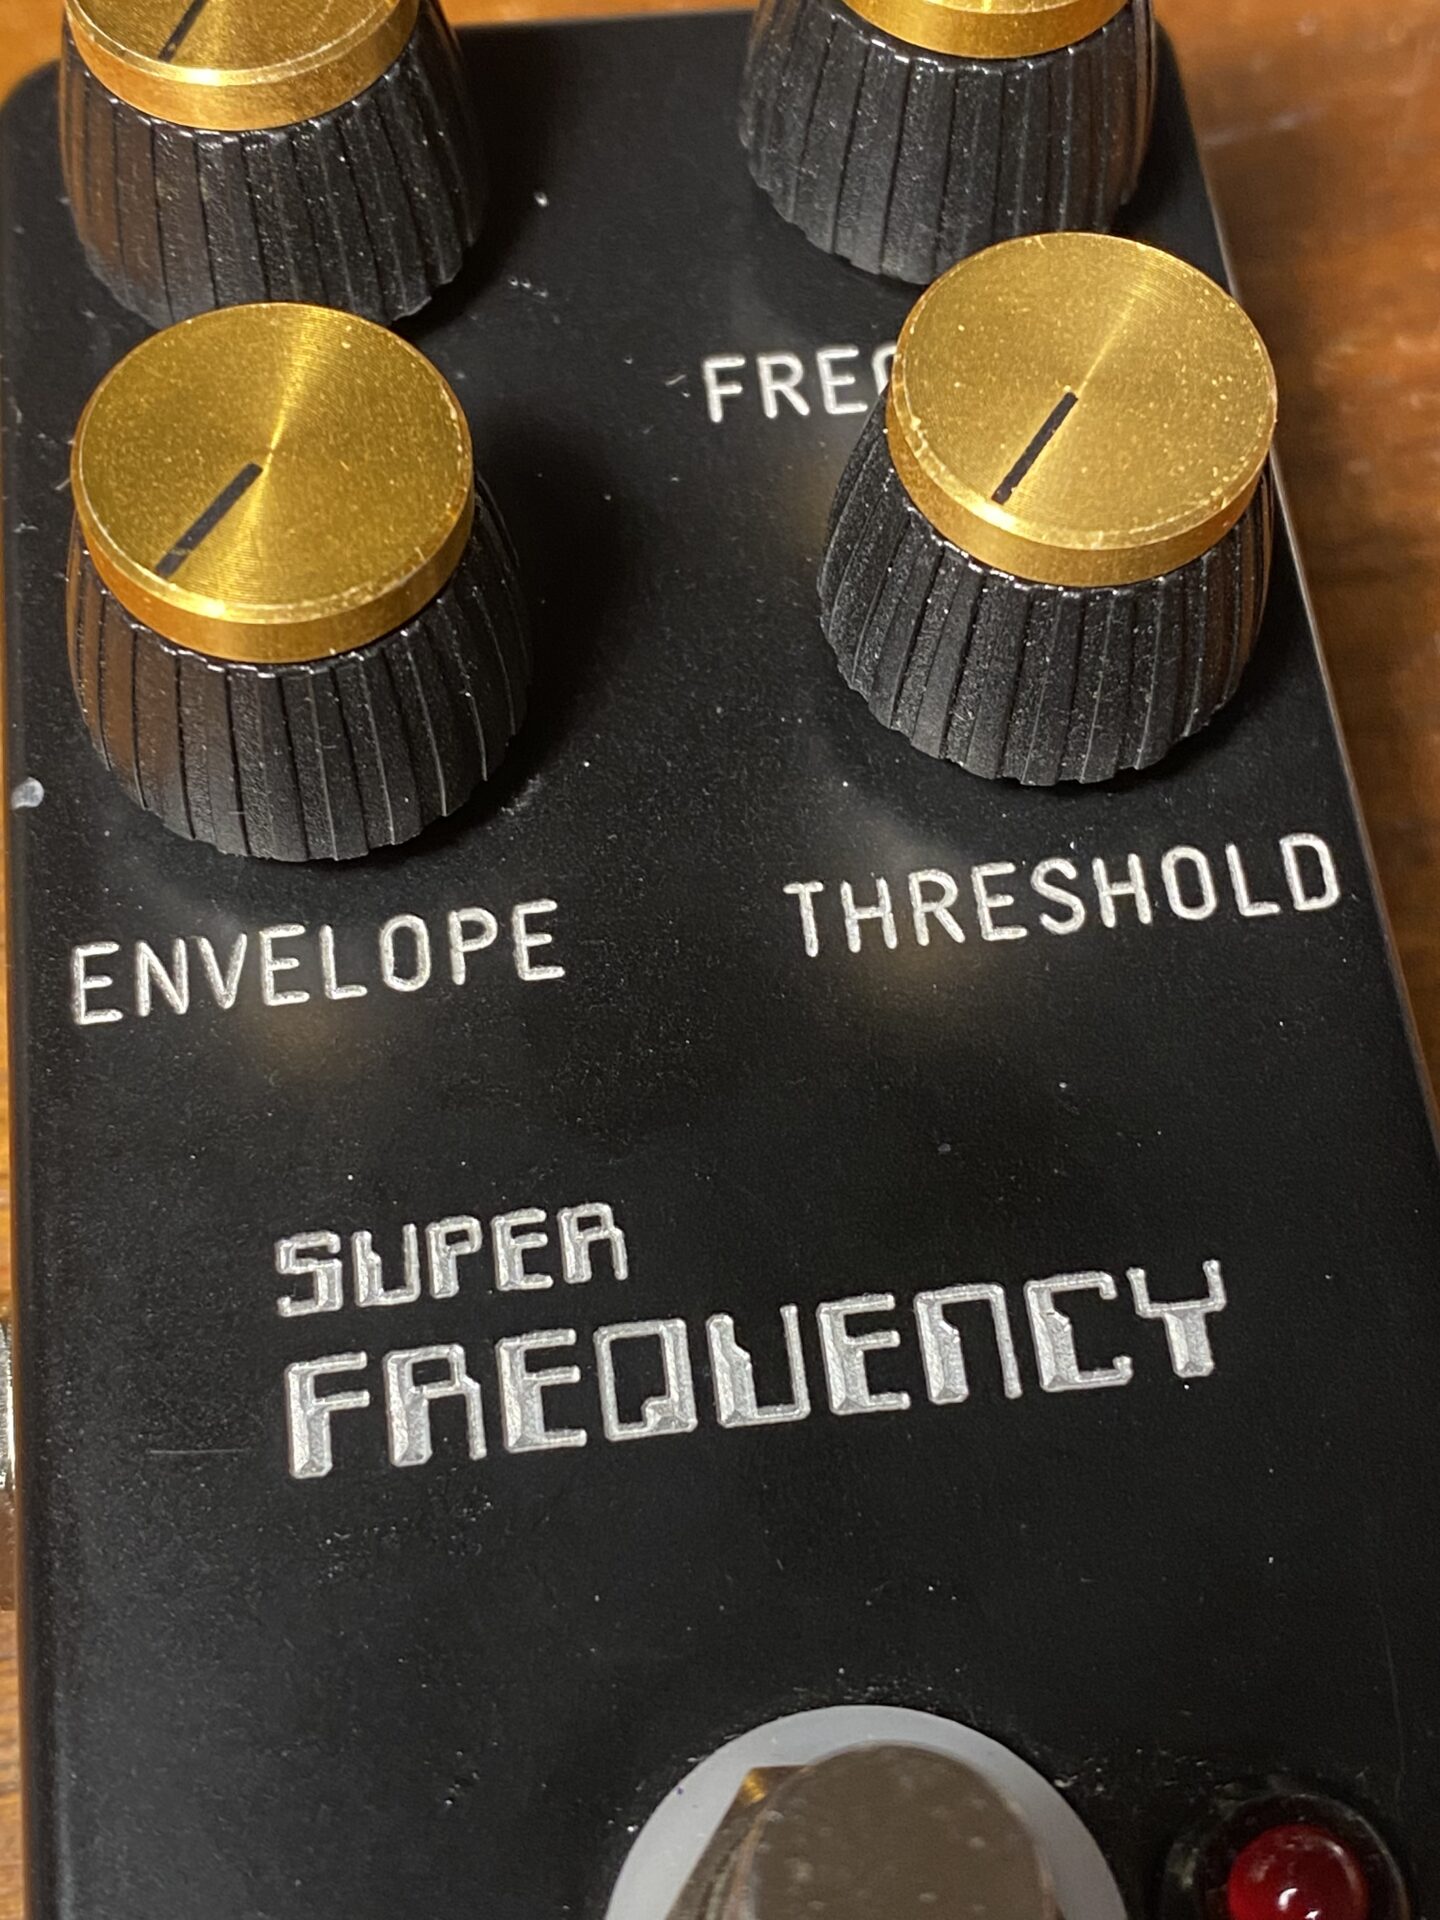 Super Frequency